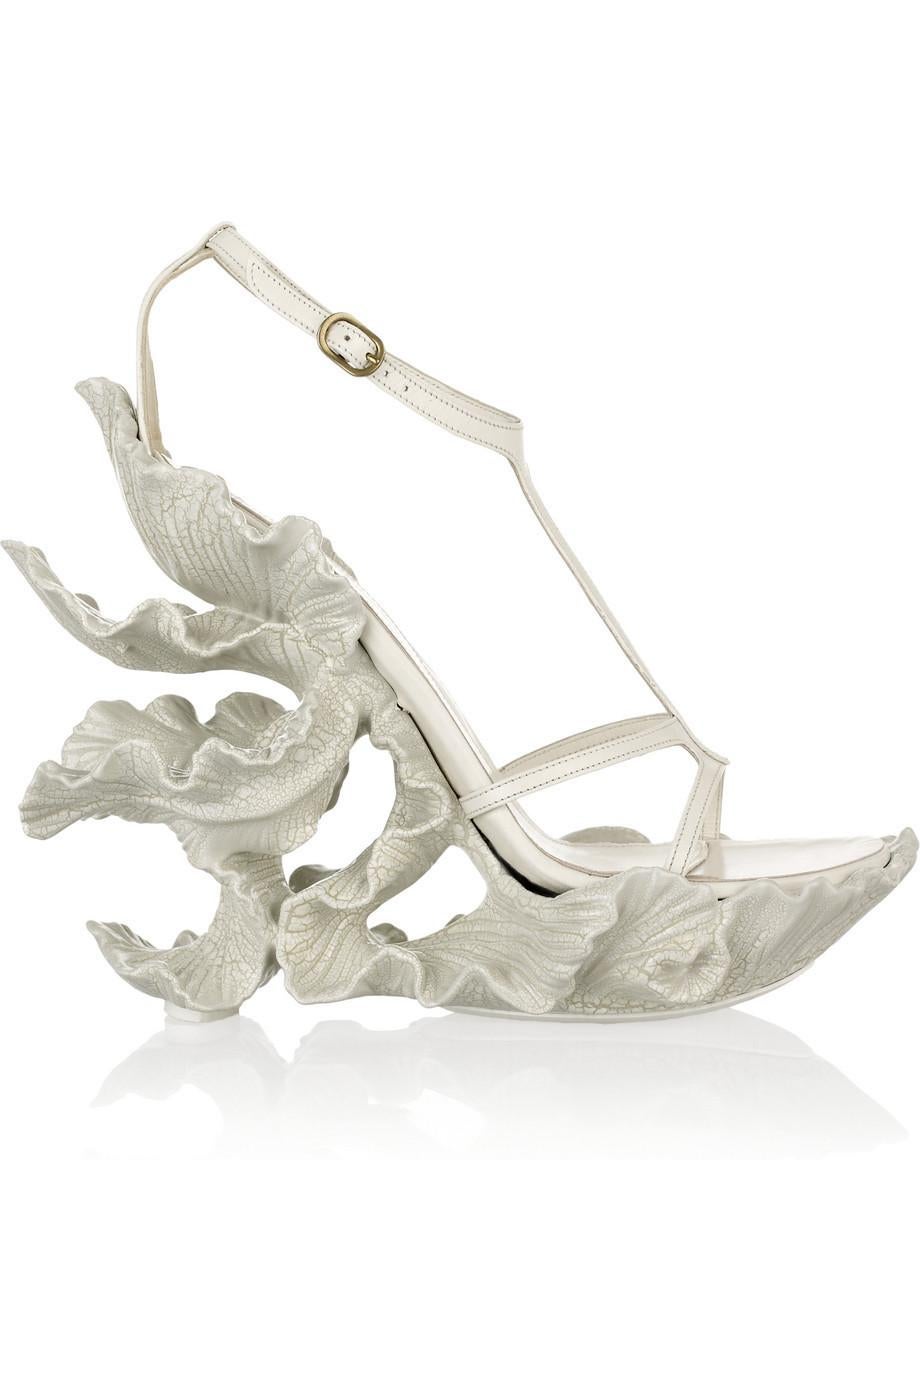 Alexander McQueen cream leather, sculpted resin leaf sandals with 6